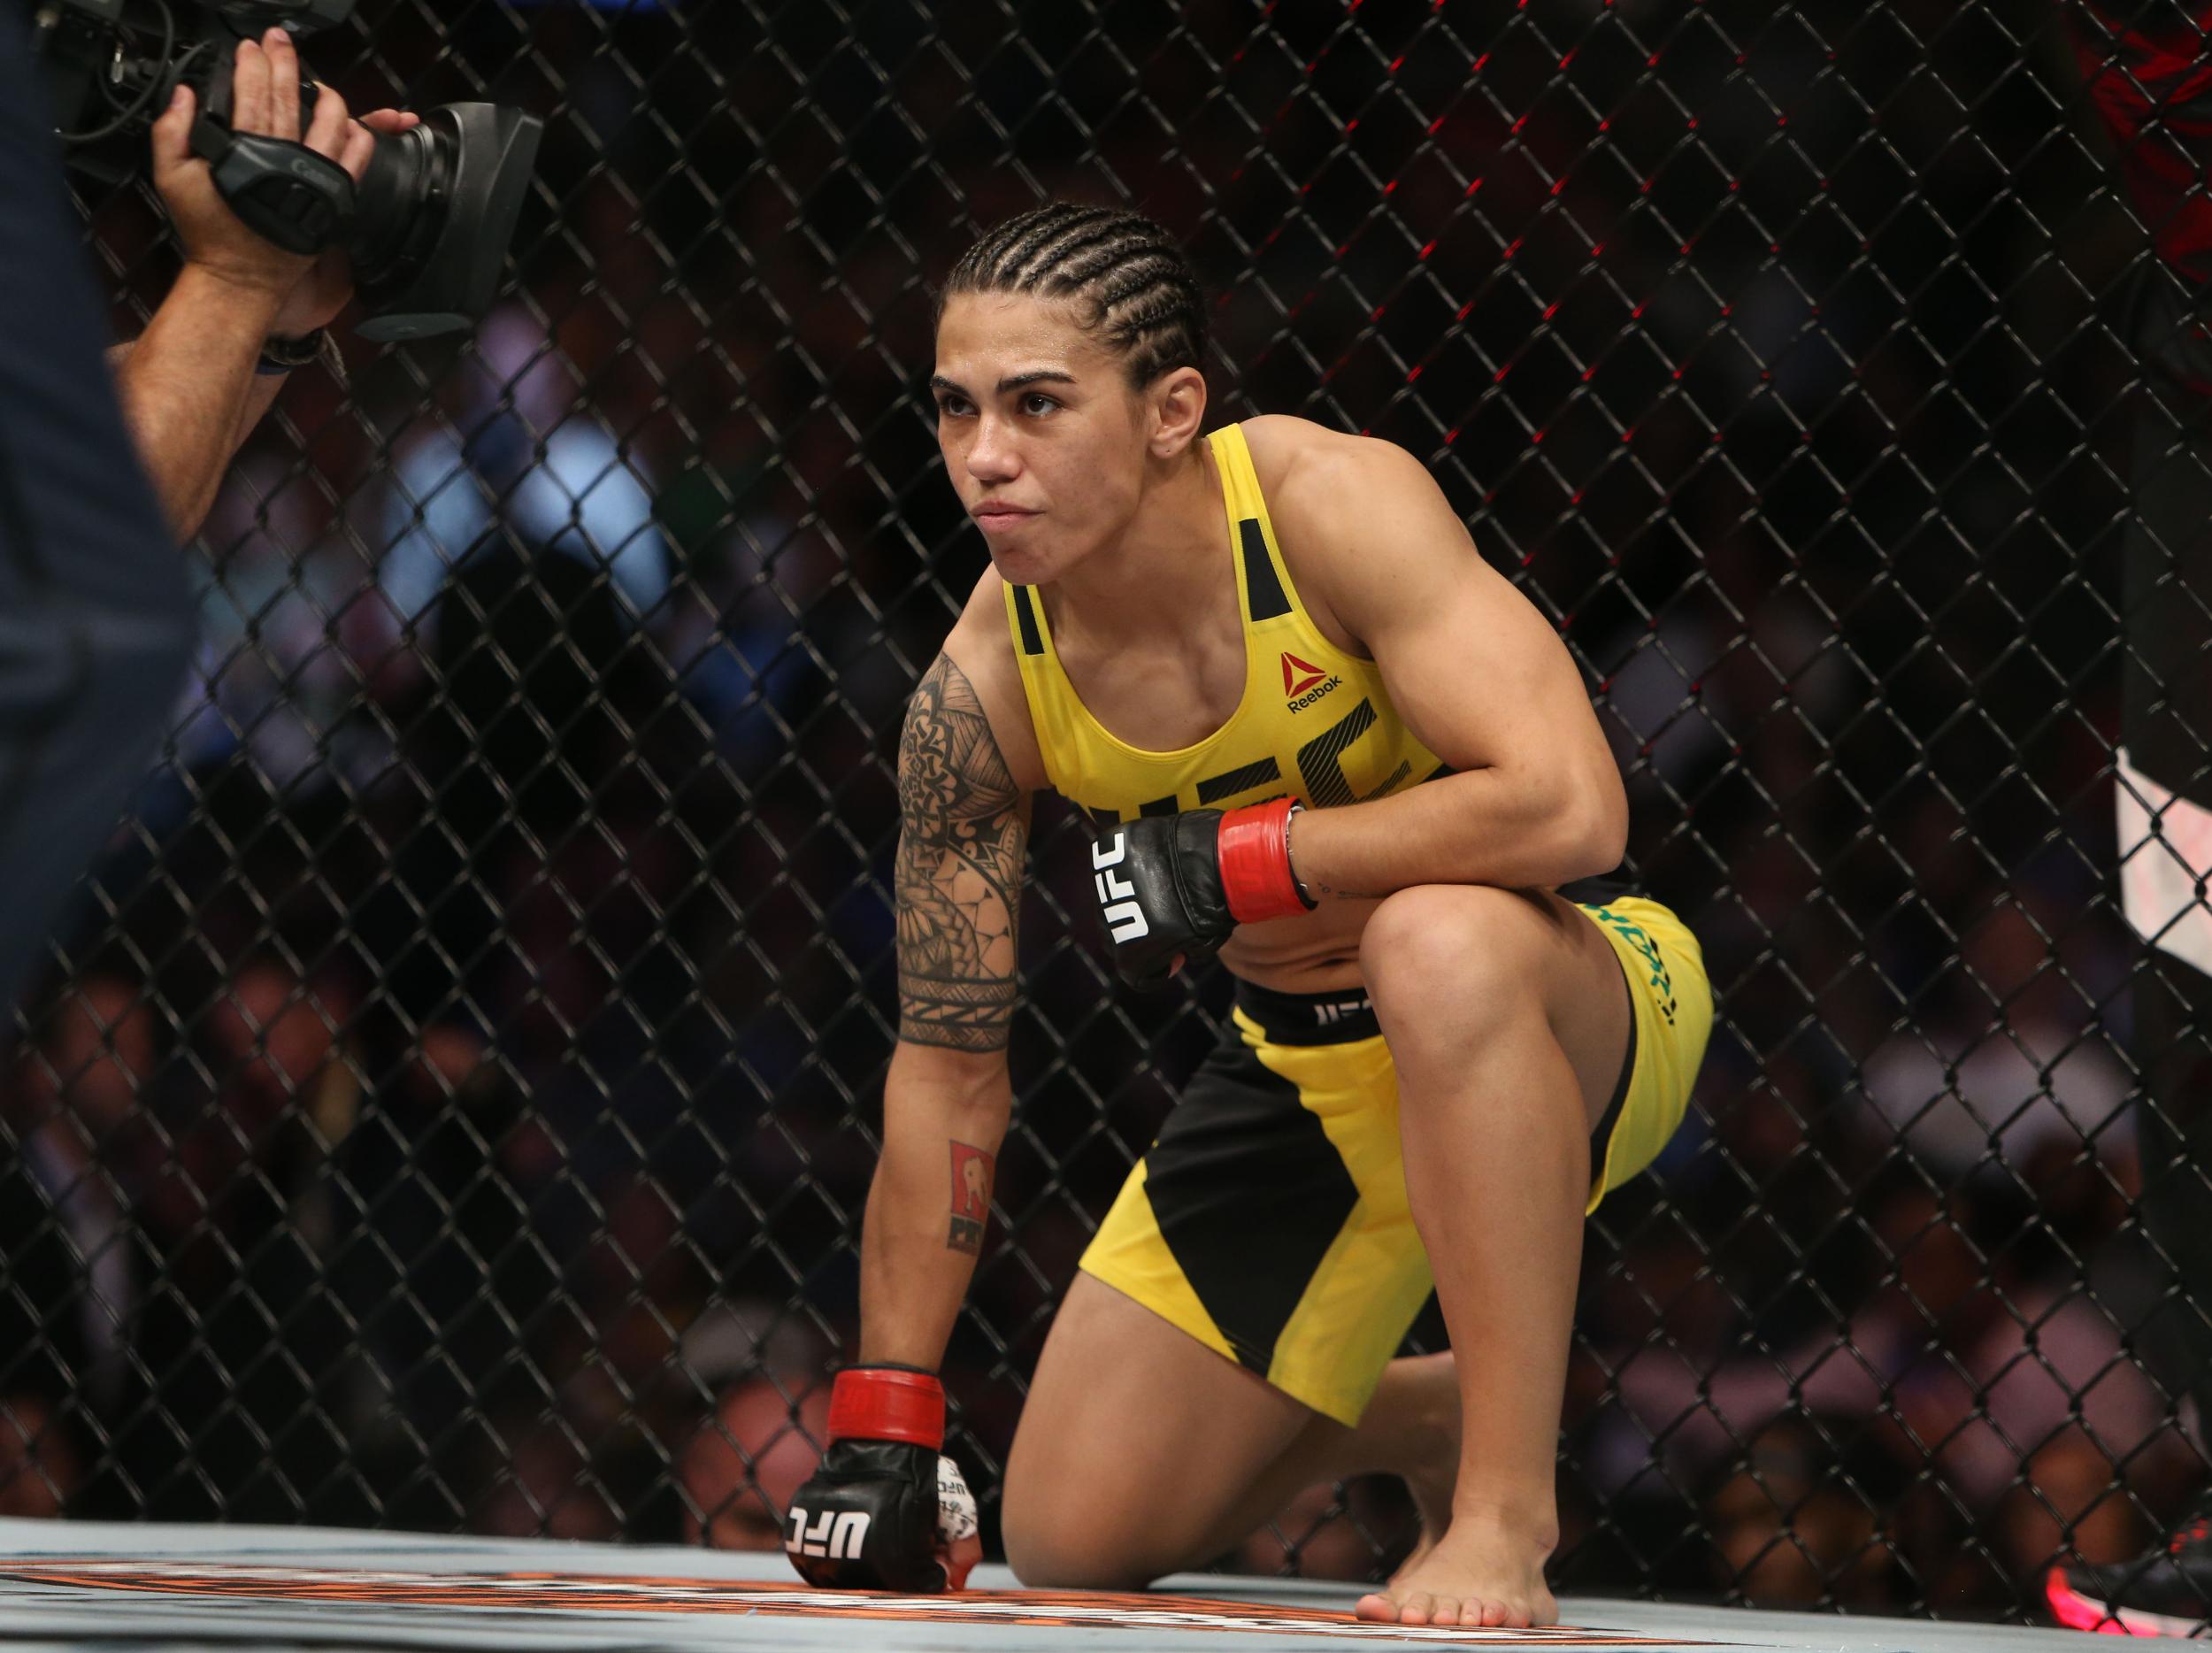 Jessica Andrade is a former strawweight champion